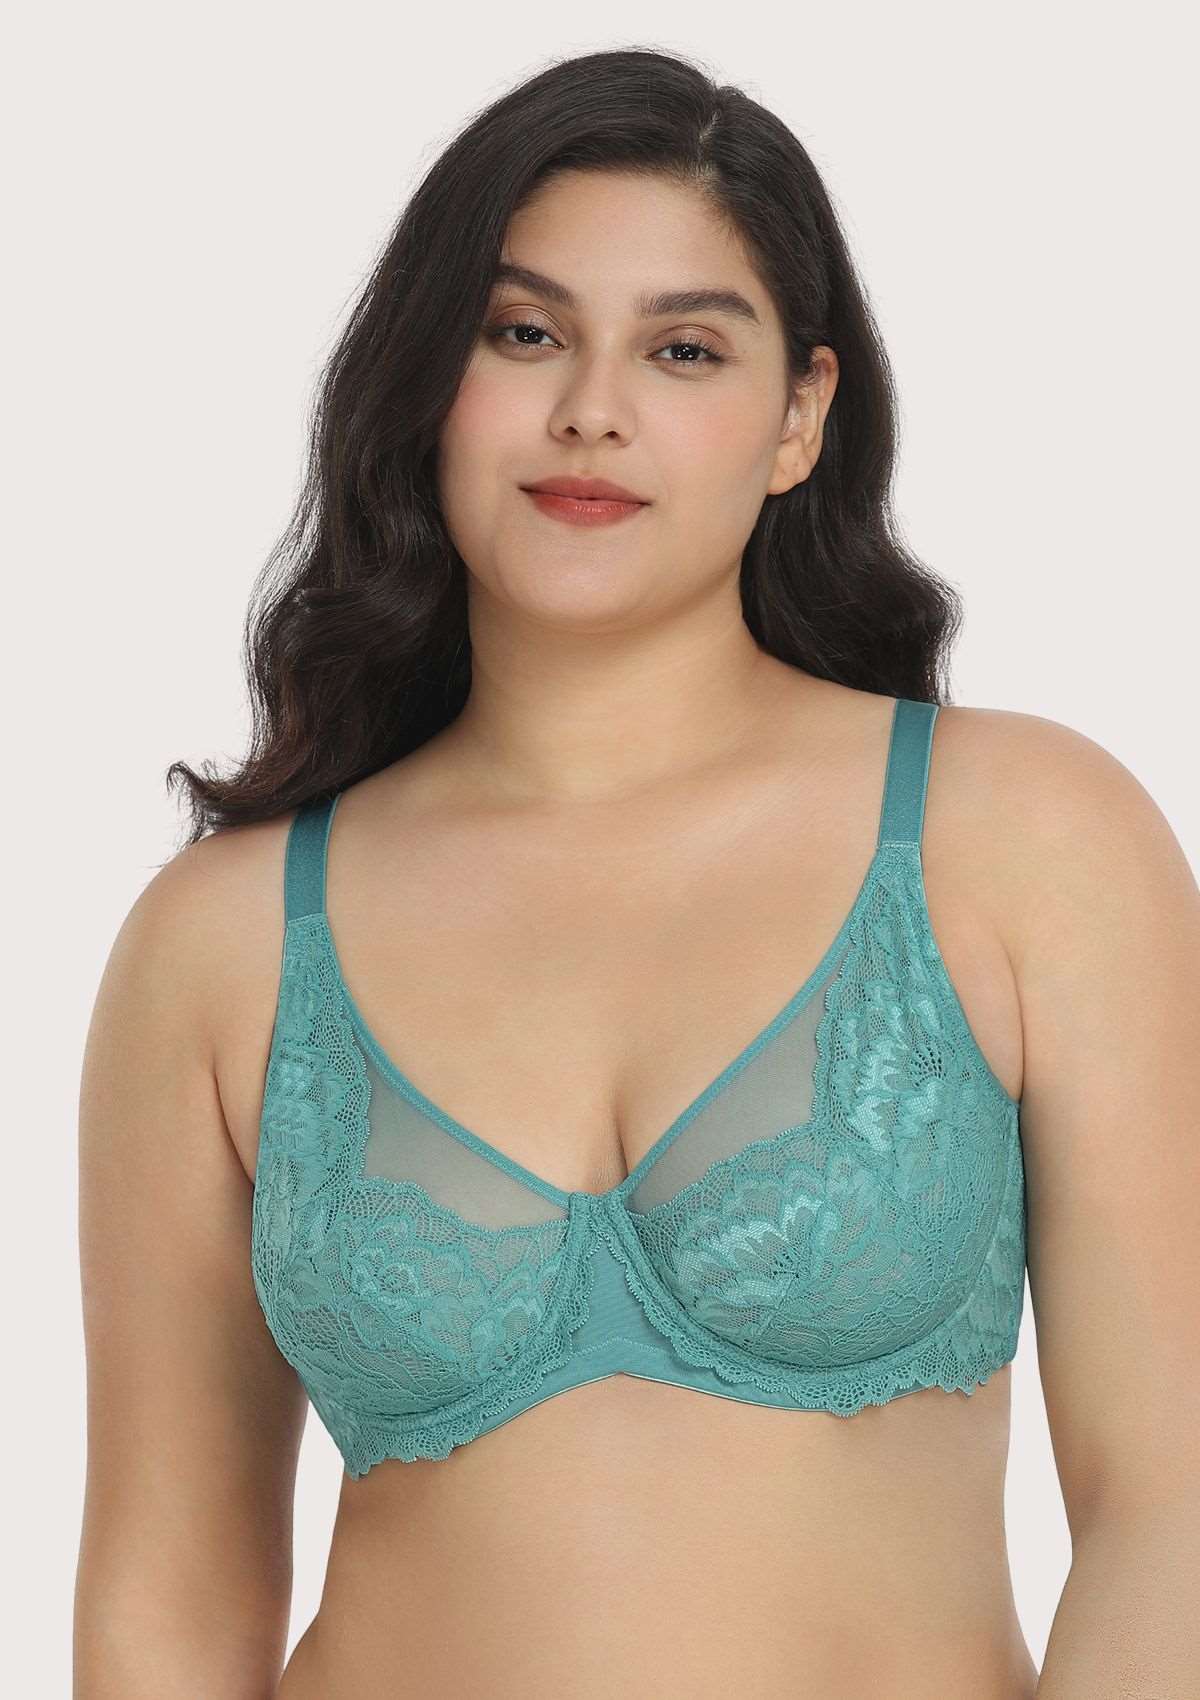 HSIA Paeonia Lace Full Coverage Underwire Non-Padded Uplifting Bra - Light Coral / 34 / DDD/F